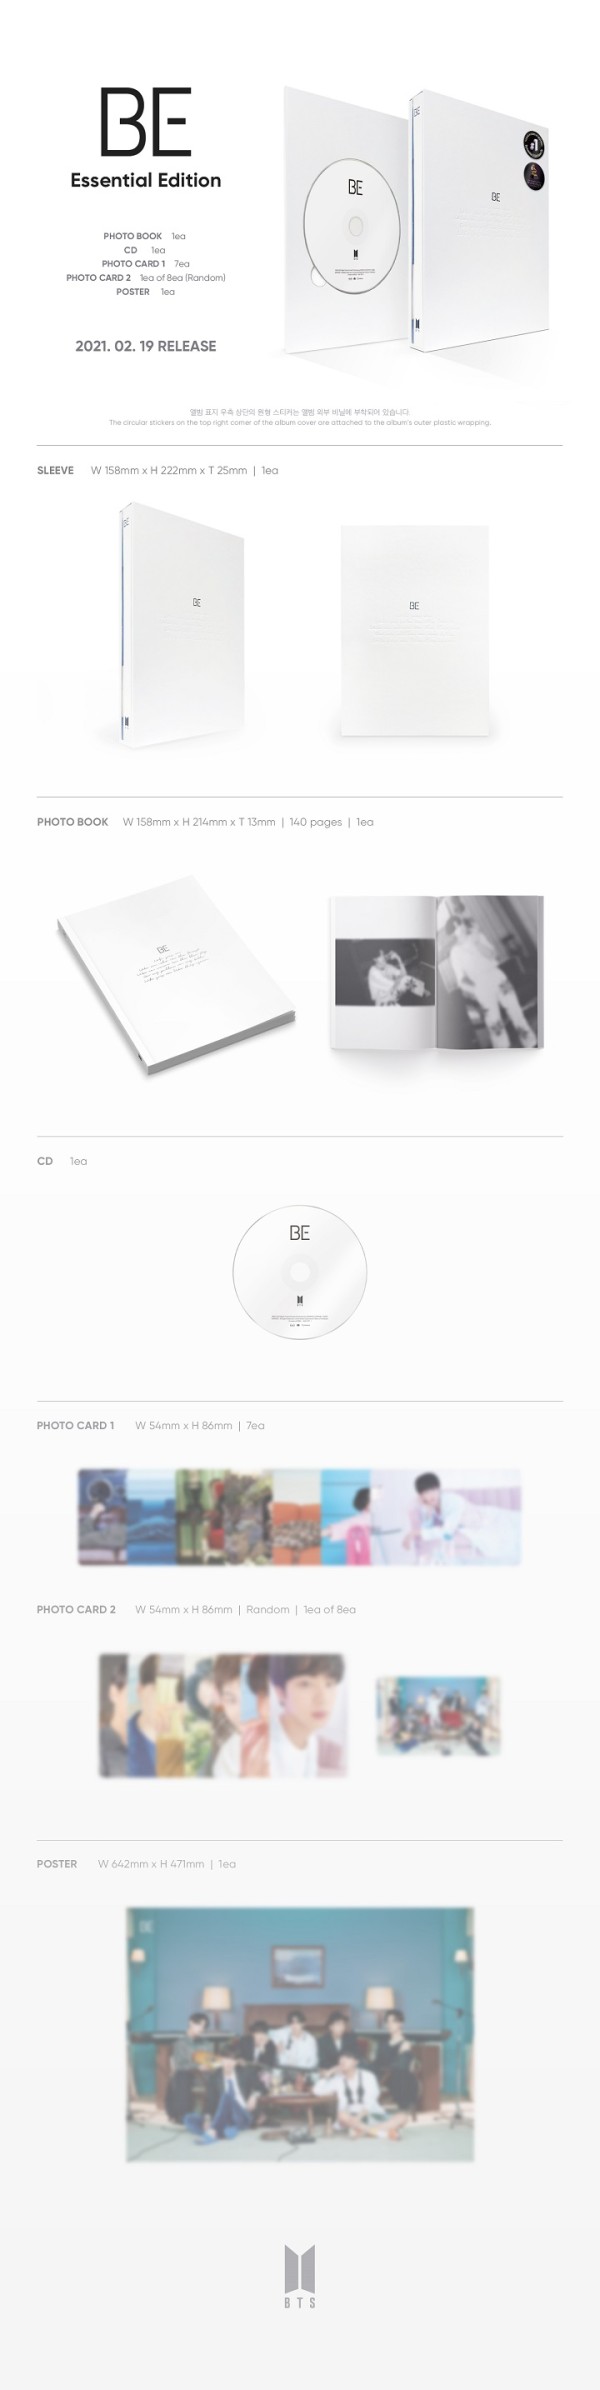 BTS｜韓国アルバム『BE (Essential Edition) 』 - TOWER RECORDS ONLINE